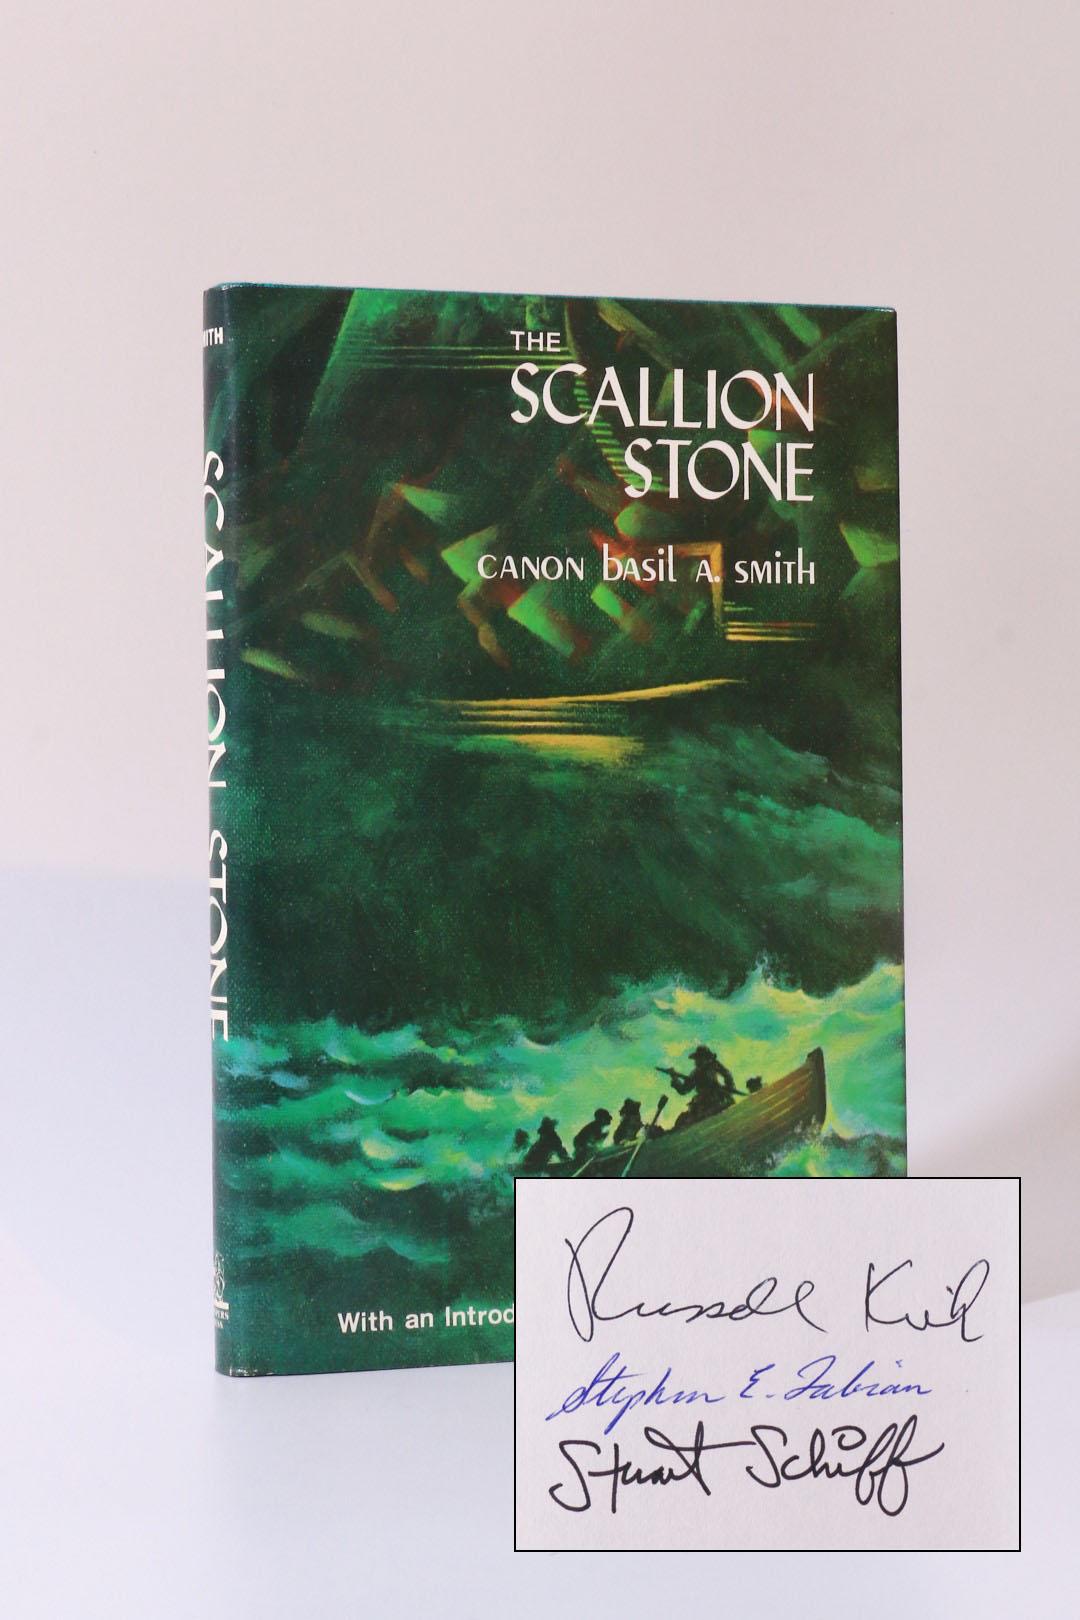 Canon Basil A. Smith - The Scallion Stone - Whispers Press, 1980, Signed Limited Edition.